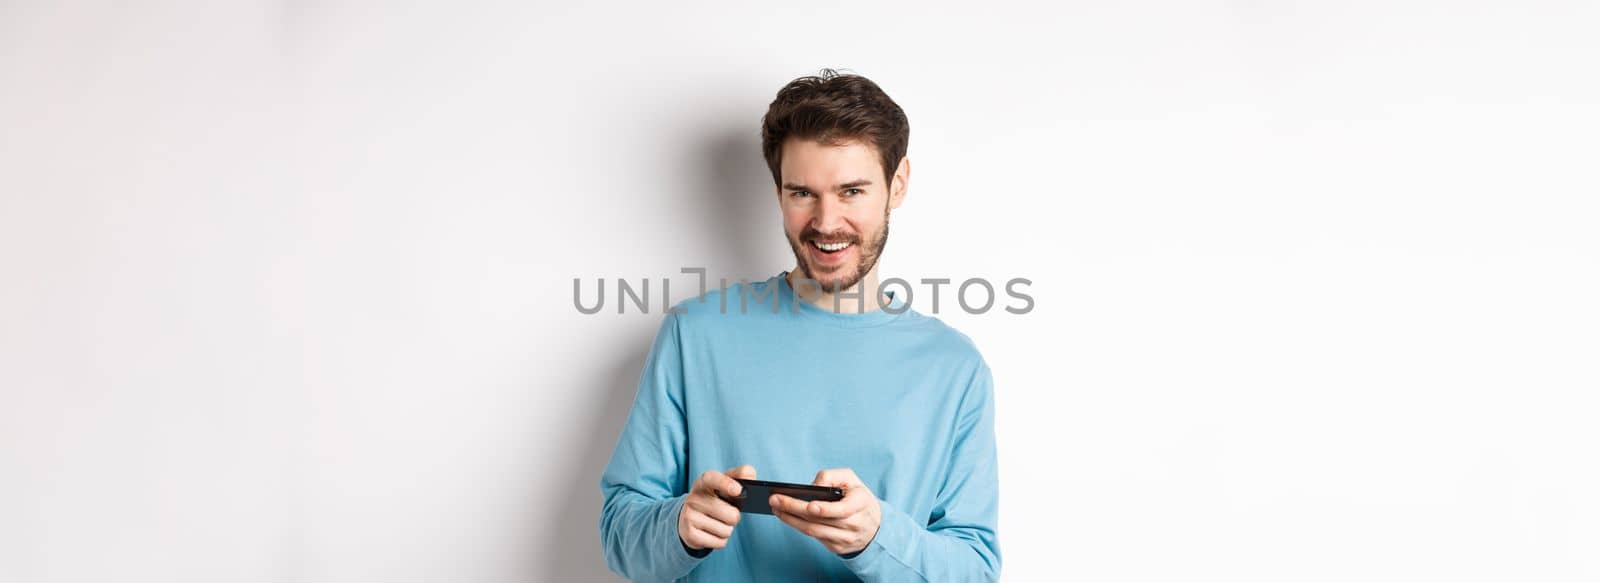 Image of handsome young man playing mobile video game, holding smartphone horizontally and smiling at camera pleased, standing over white background.